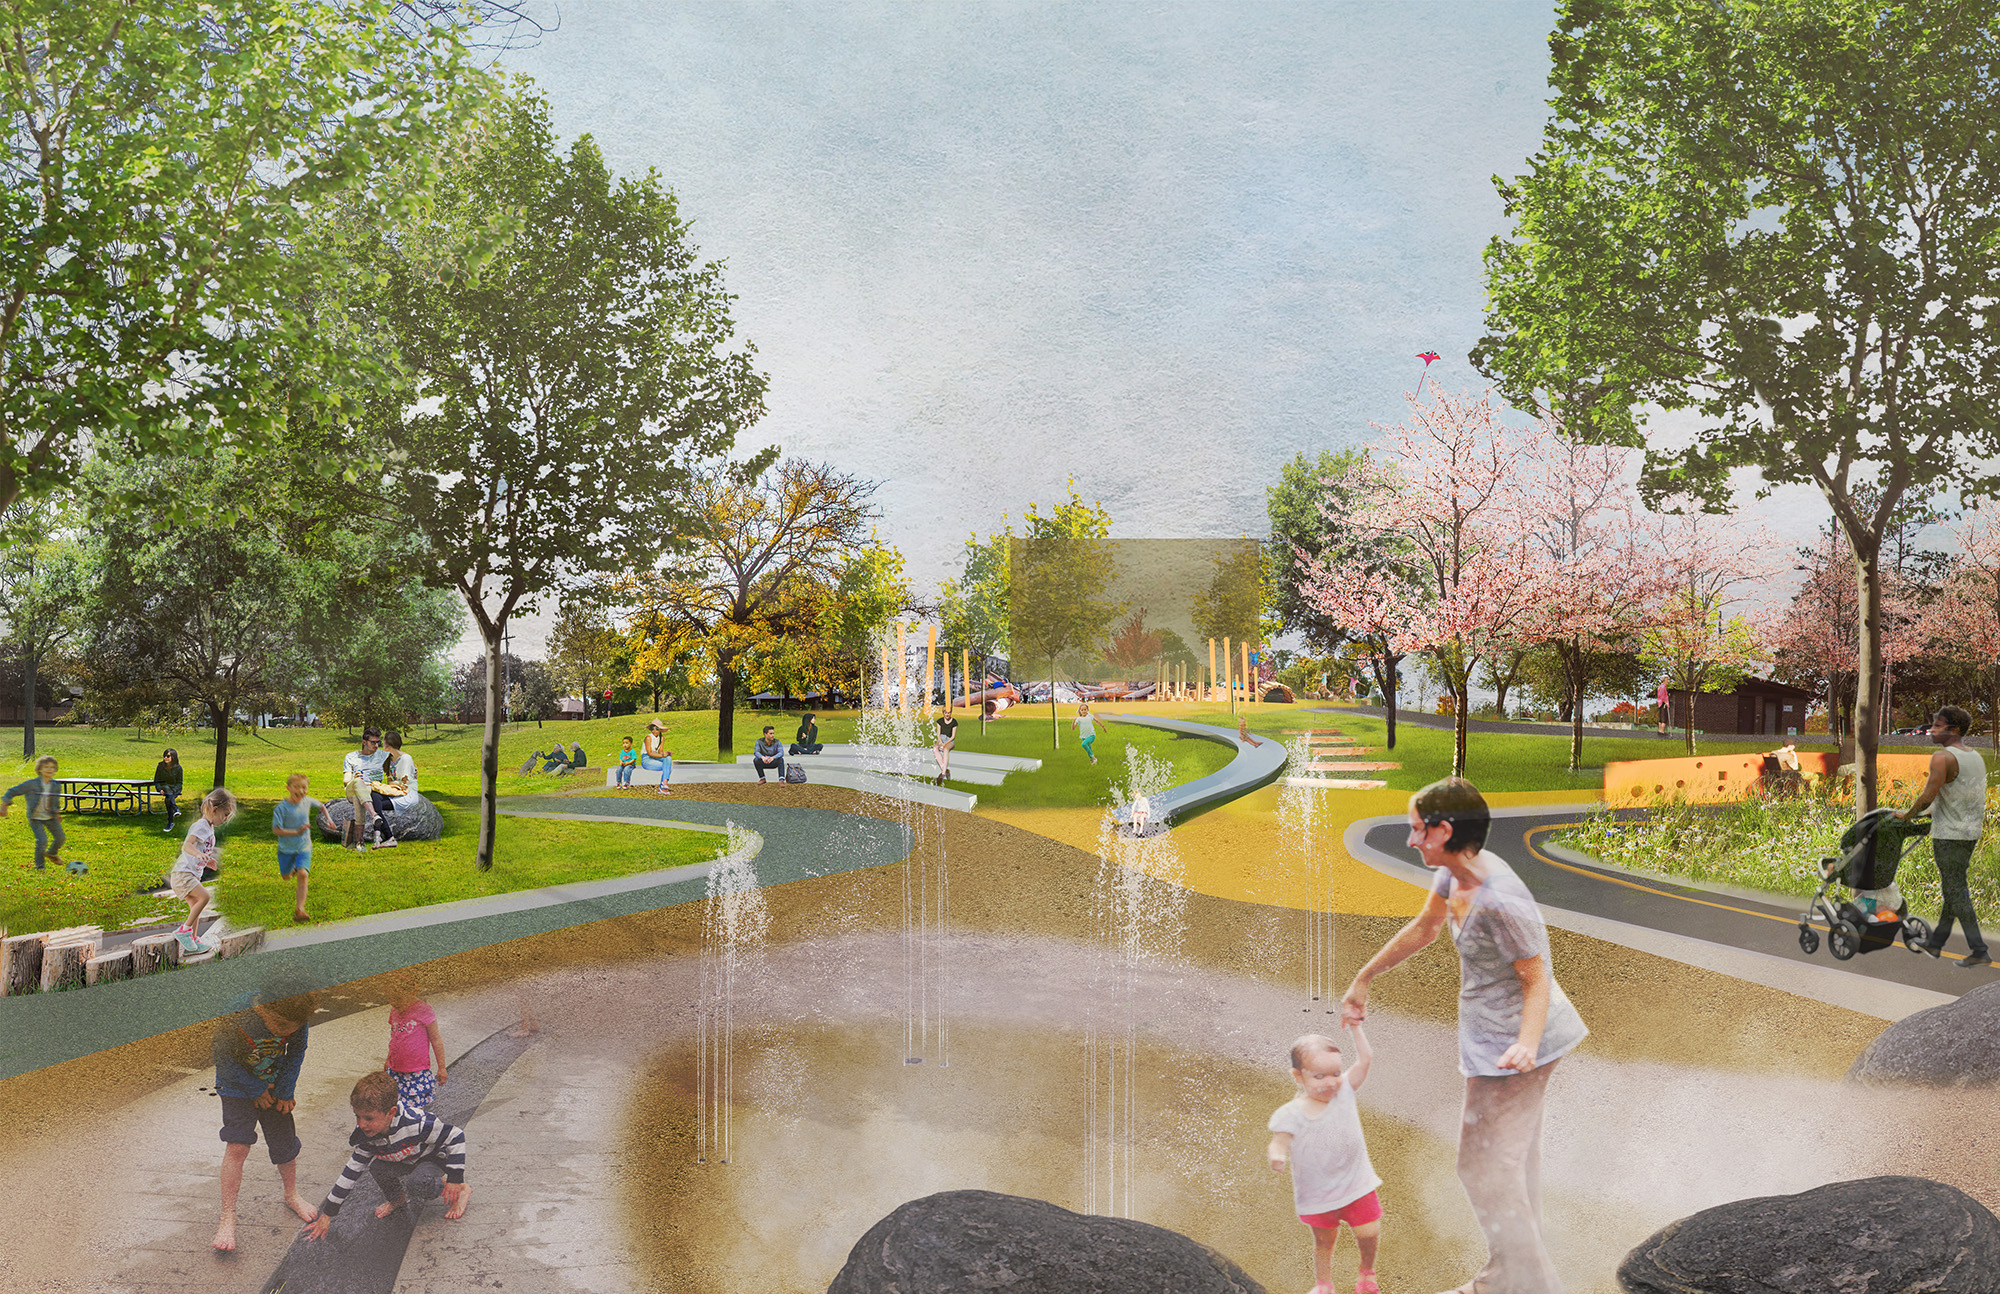 This view demonstrates what the playground and splashpad that straddle a slope. At the base of the slope is the hard-surfaced splashpad with an integrated creek. An accessible path with sensory play connects the top and bottom of the slope, with the majority of the play equipment located at the top (outside of the creek ravine). An accessible amphitheatre provides an outdoor teaching space.